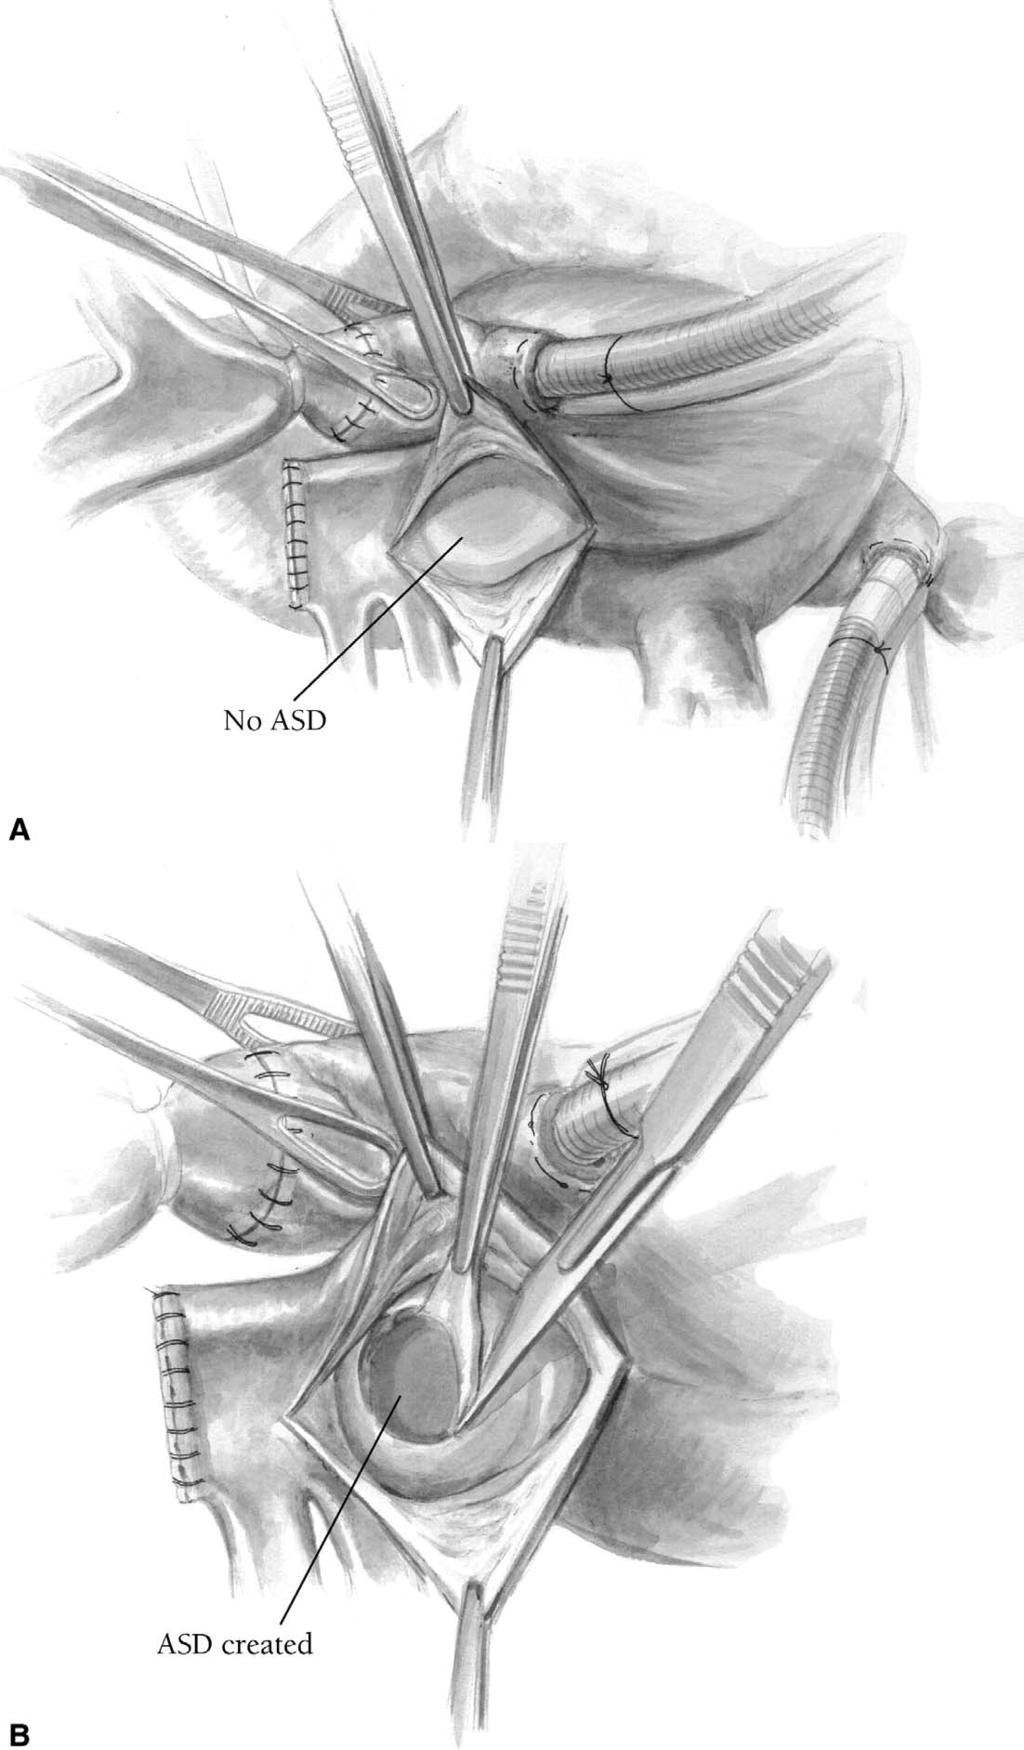 The Warden procedure 31 Figure 9 If an atrial septal defect is not present, a defect in the interatrial septum can be created near the usual location of a sinus venosus